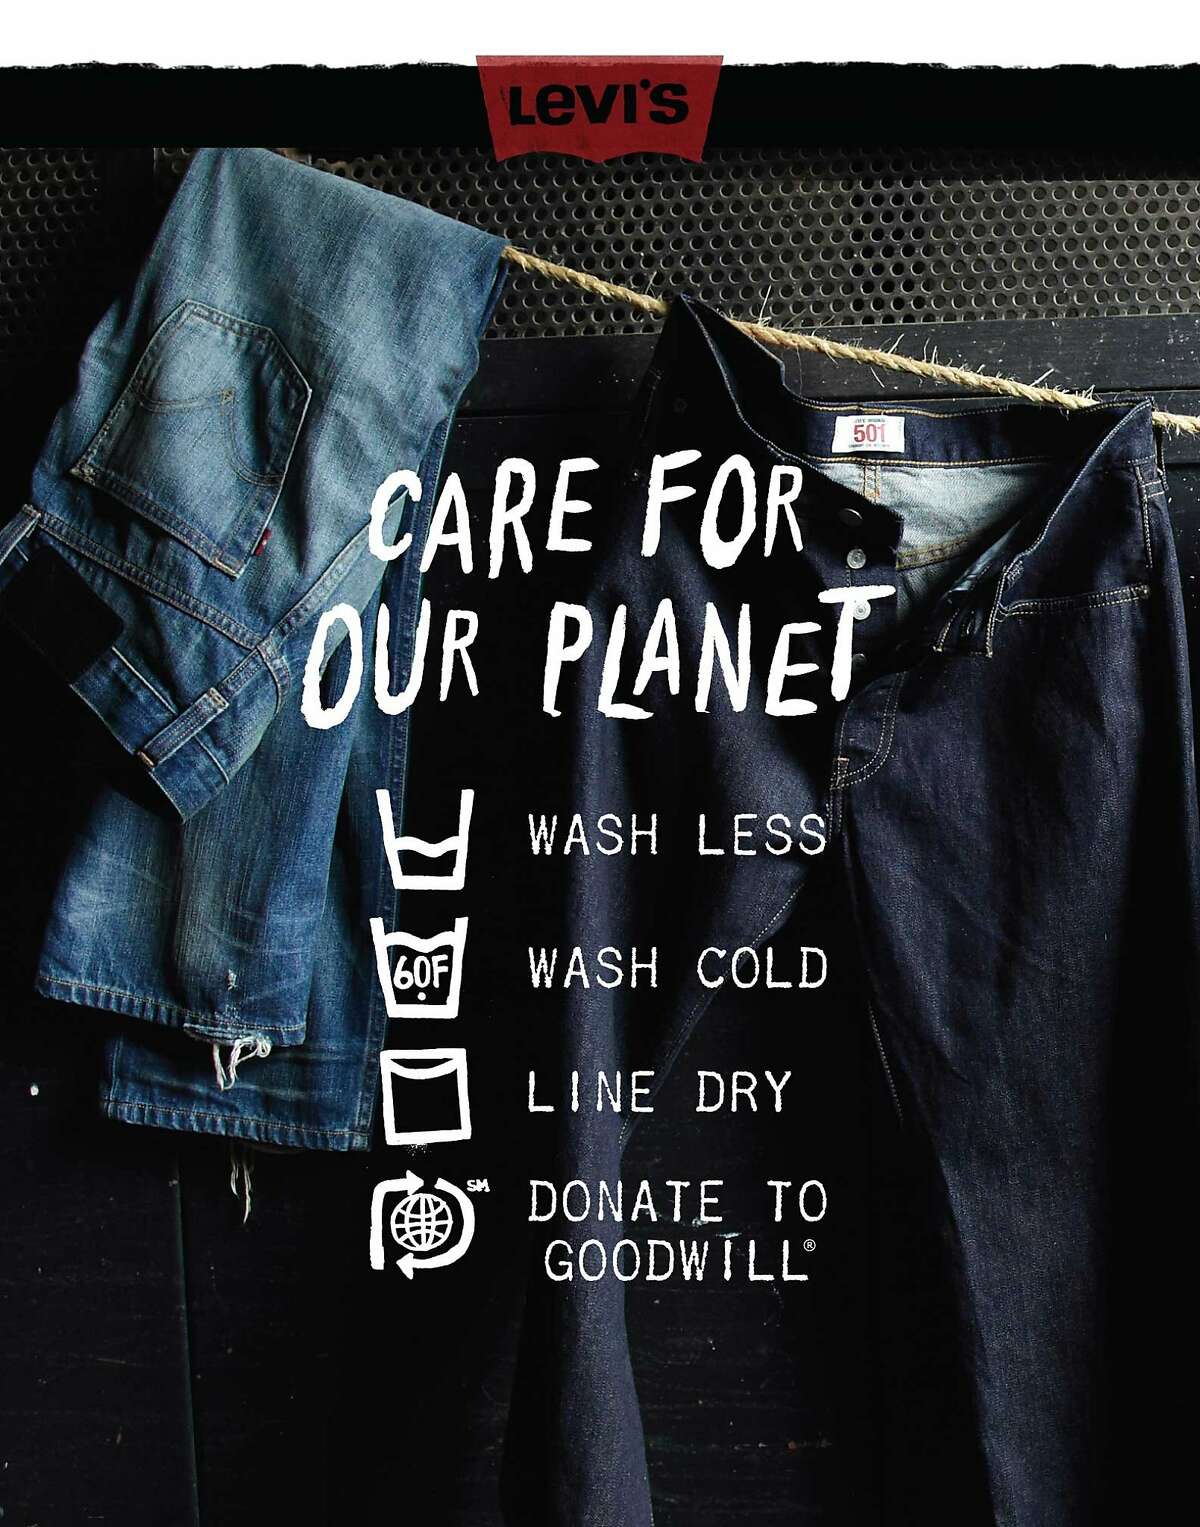 Levi's hang tag spells out its commitment to sustainability and cutting down fashion's impact on the environment.